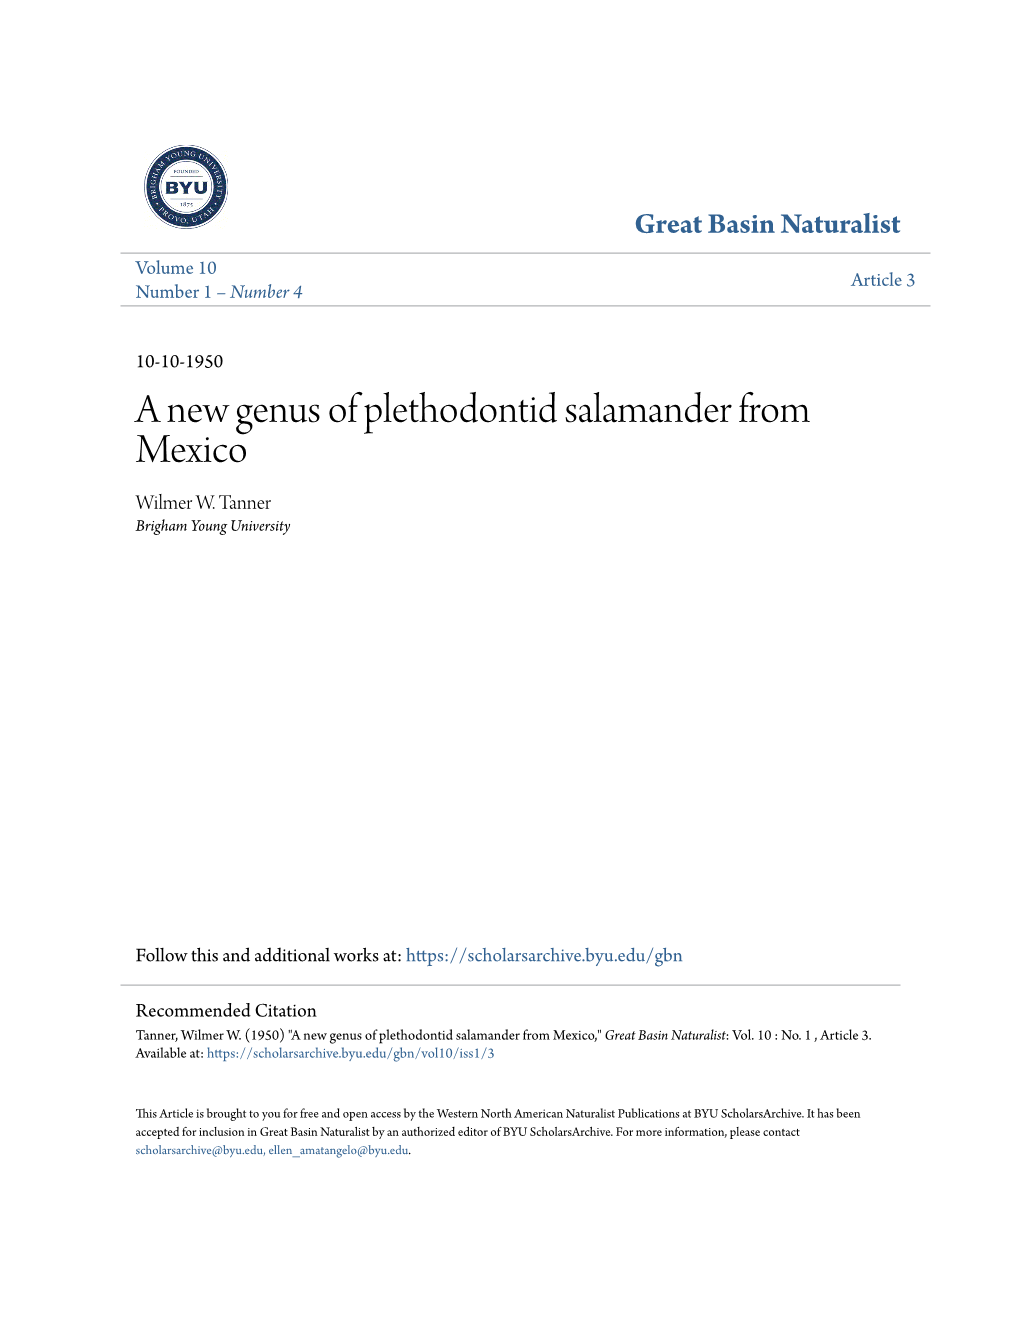 A New Genus of Plethodontid Salamander from Mexico Wilmer W